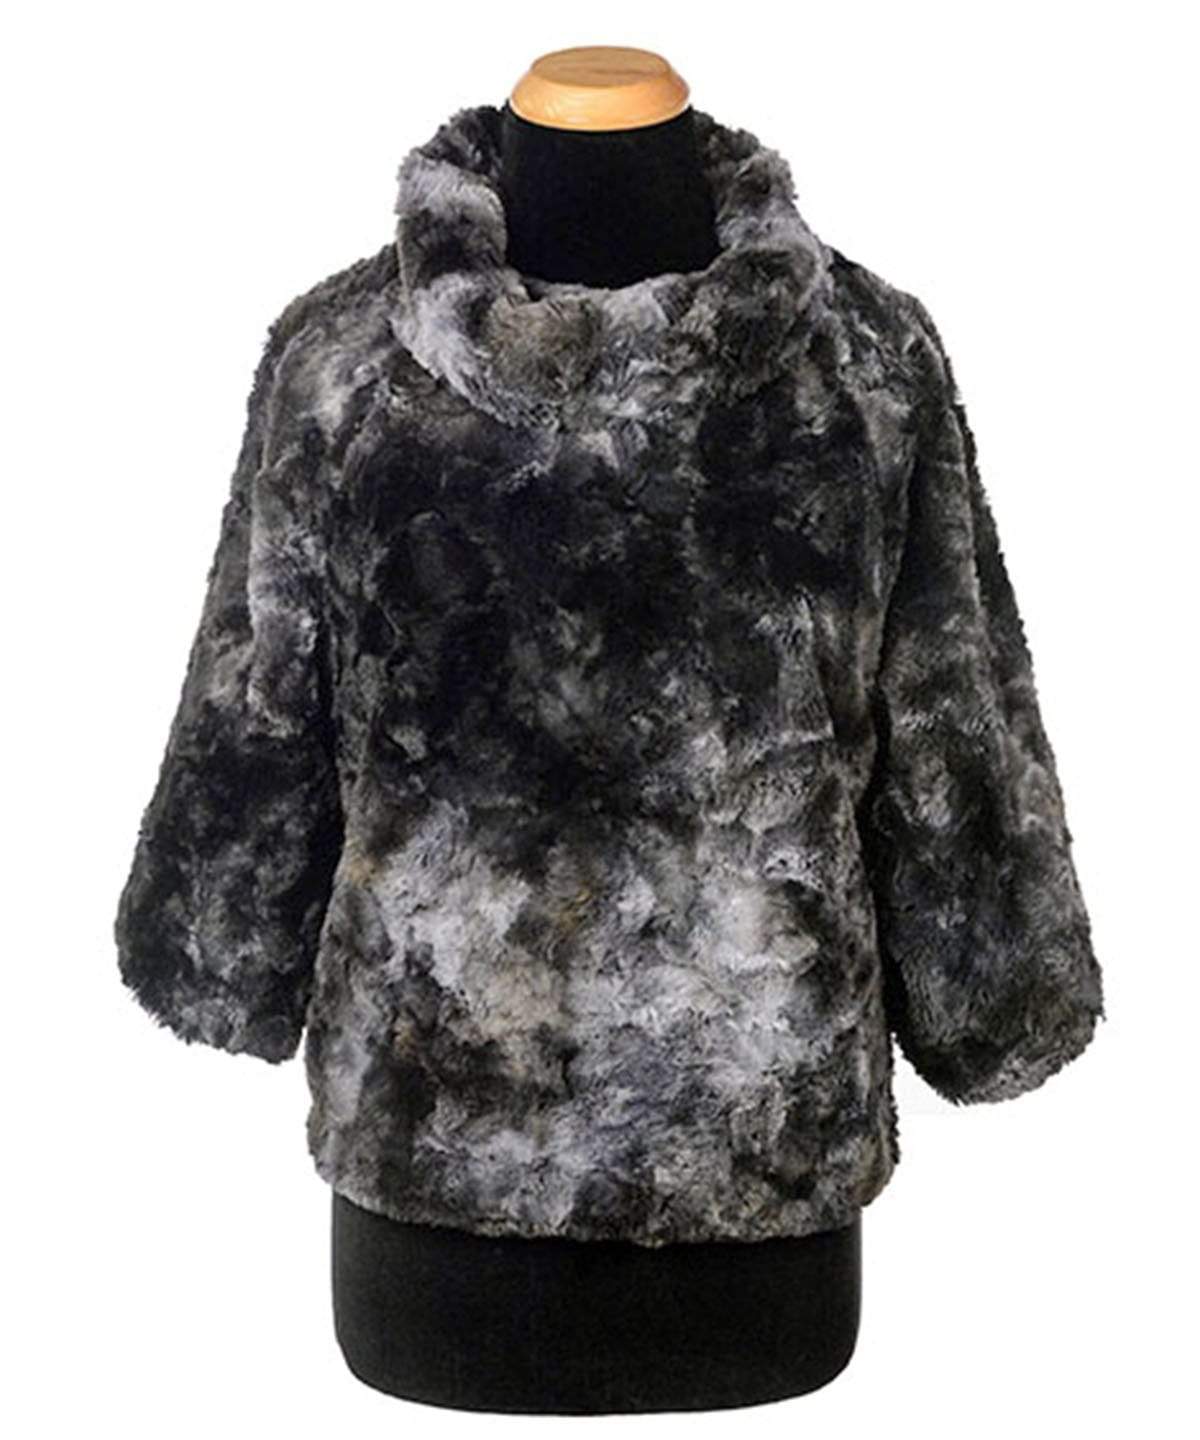 Sweater Top - Luxury Faux Fur in Highland Skye - Sold Out!